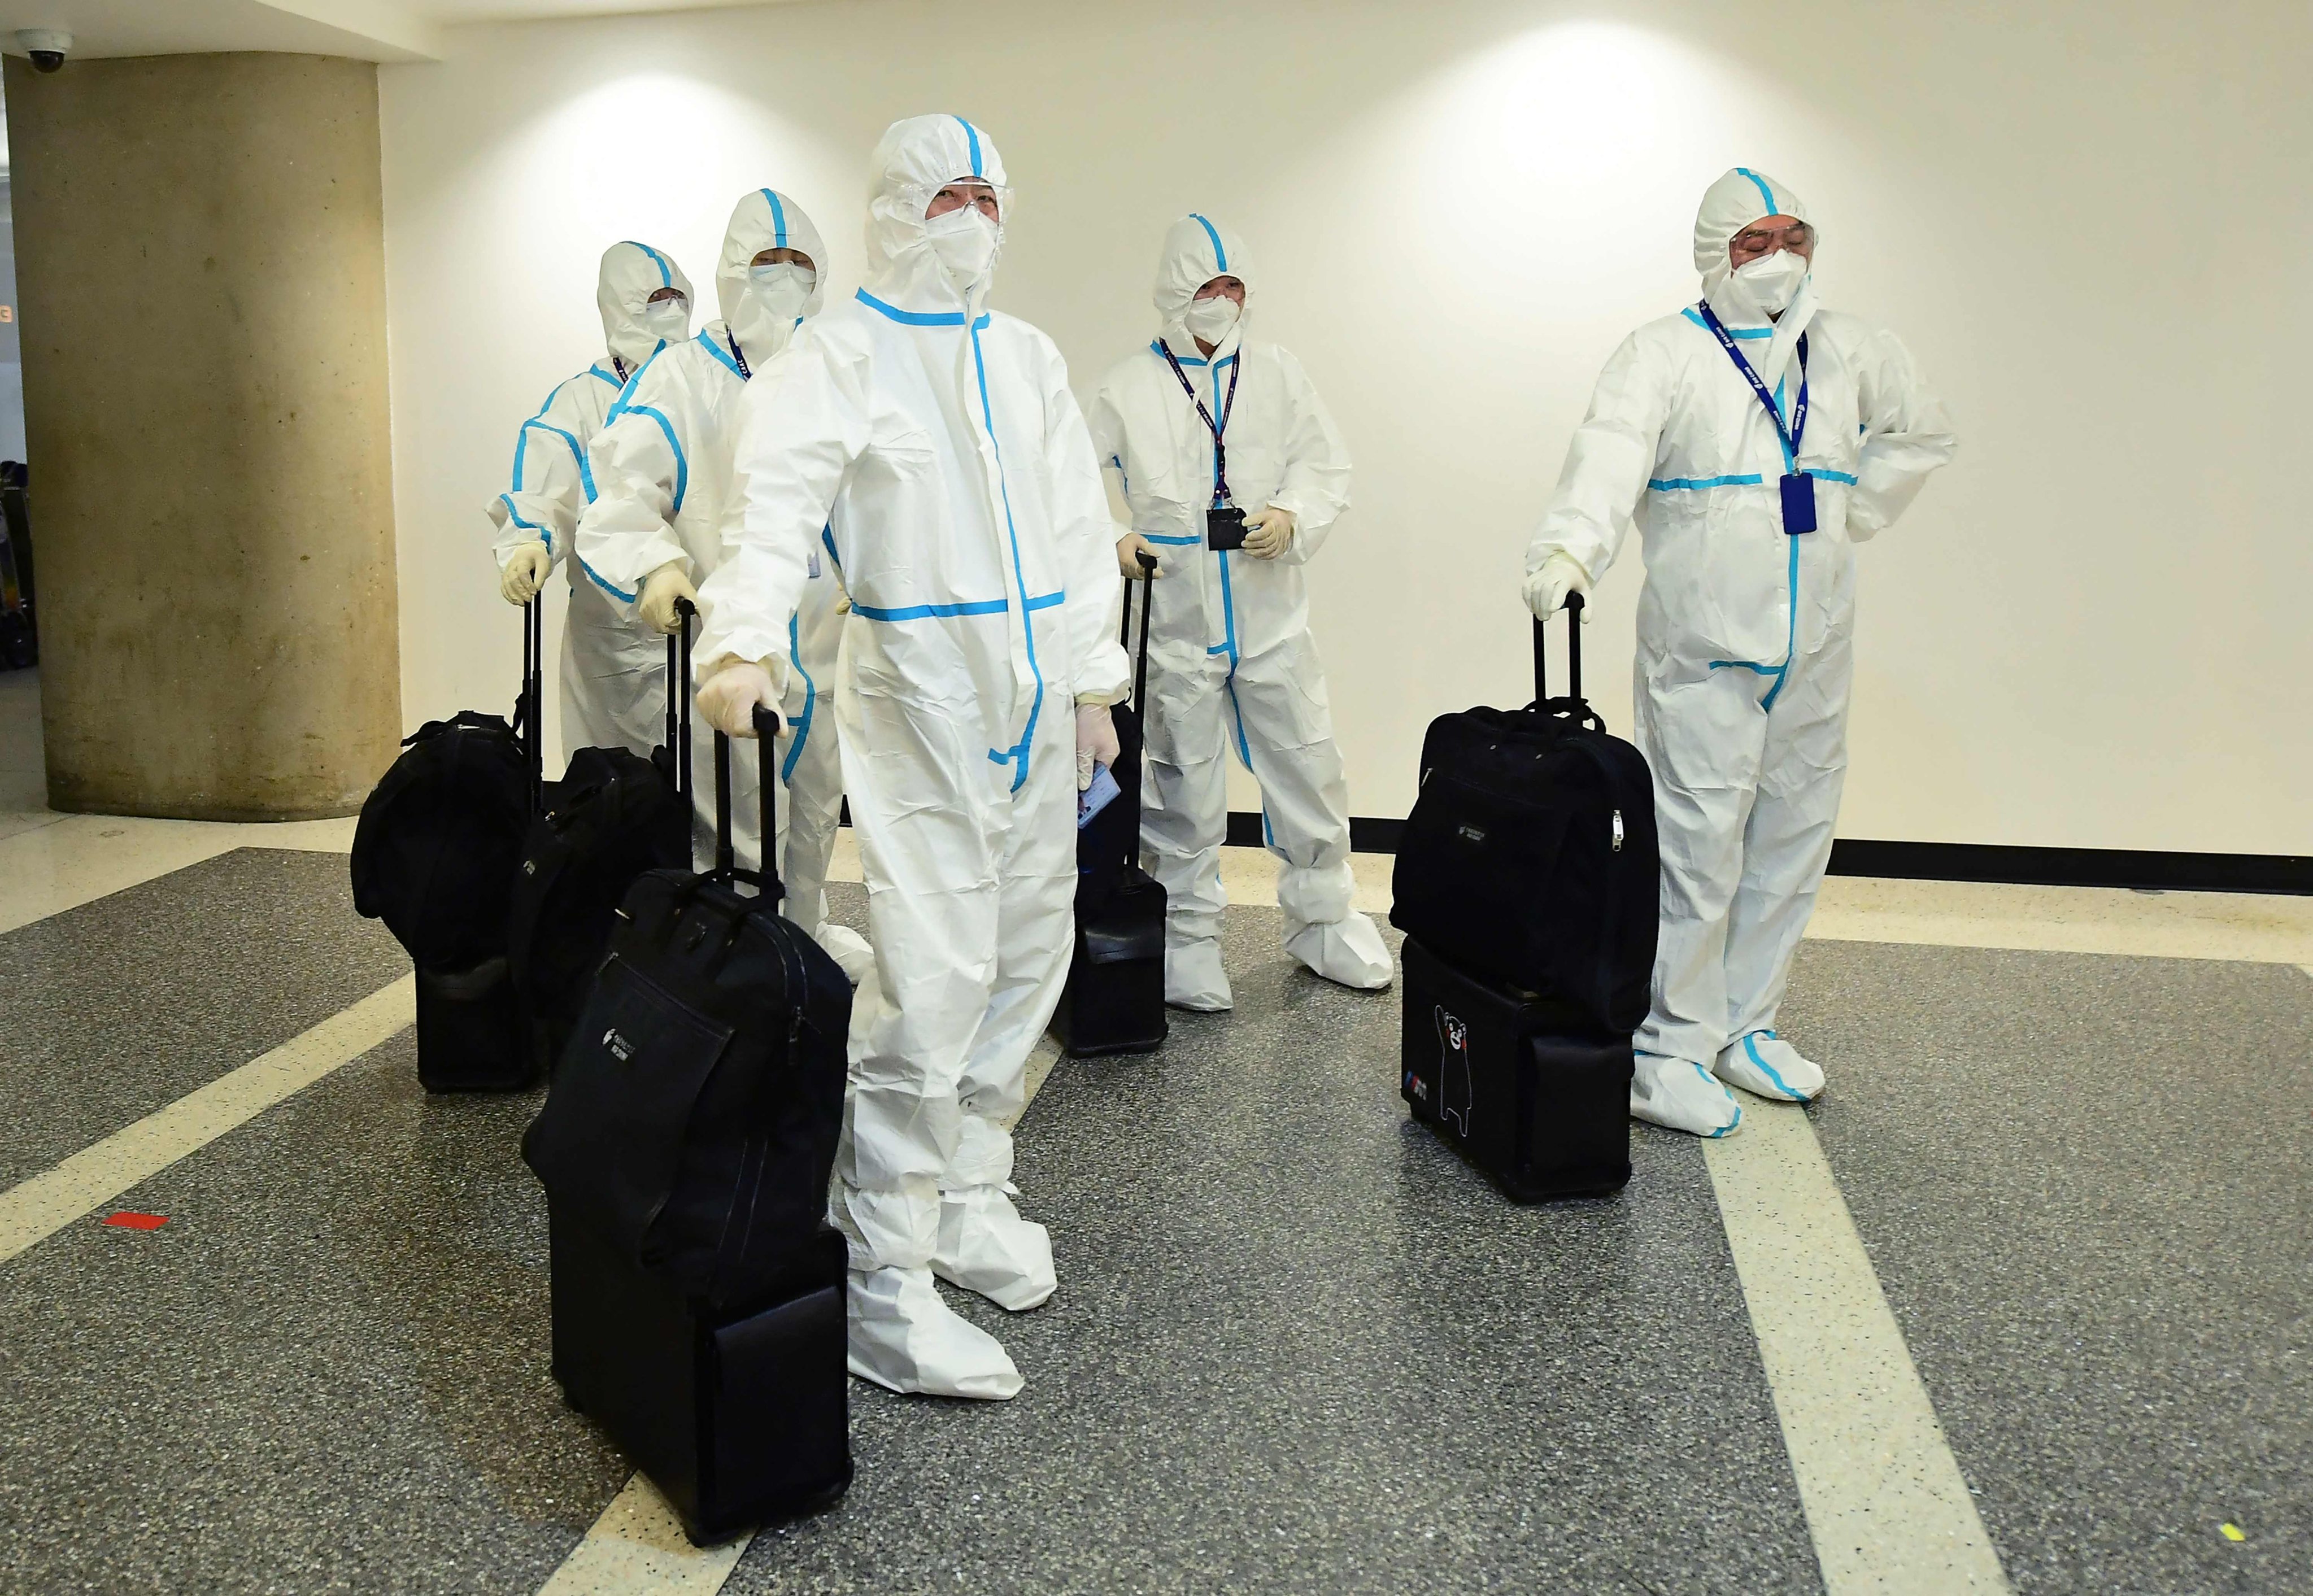 In this file photo taken on December 3, 2021, the flight crew from Air China arrive in hazmat suits in the international terminal at Los Angeles International Airport. The US will require negative Covid tests from all air travelers from China, saying Beijing is not sharing enough information about the surge in coronavirus cases there. Photo: AFP